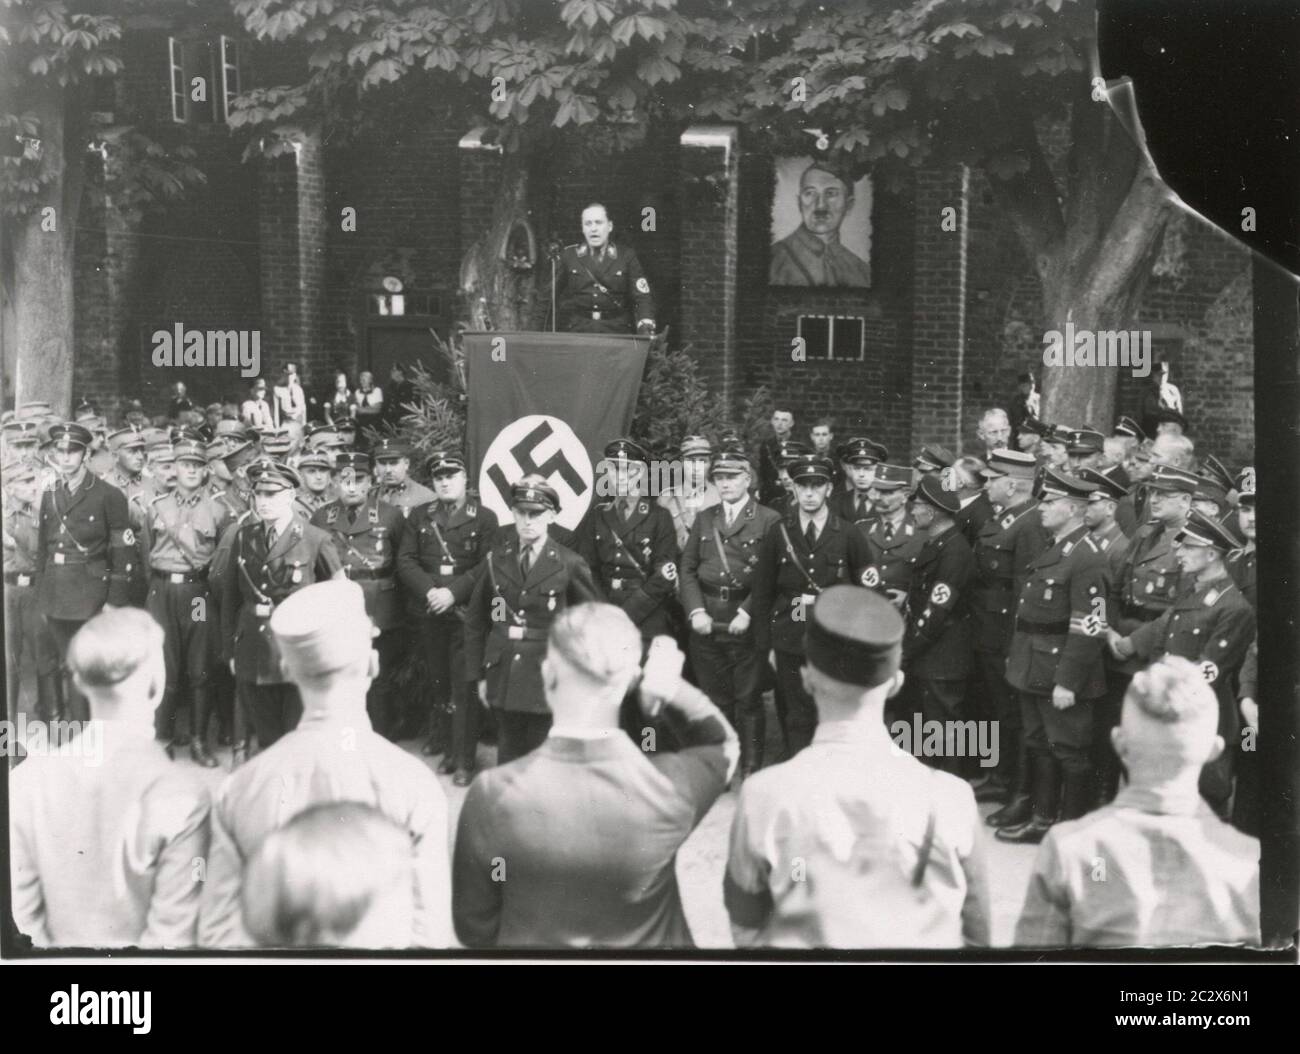 Inauguration of the Maerkische Bauerhochschule - Darro speaks Heinrich Hoffmann Photographs 1933 Adolf Hitler's official photographer, and a Nazi politician and publisher, who was a member of Hitler's intimate circle. Stock Photo